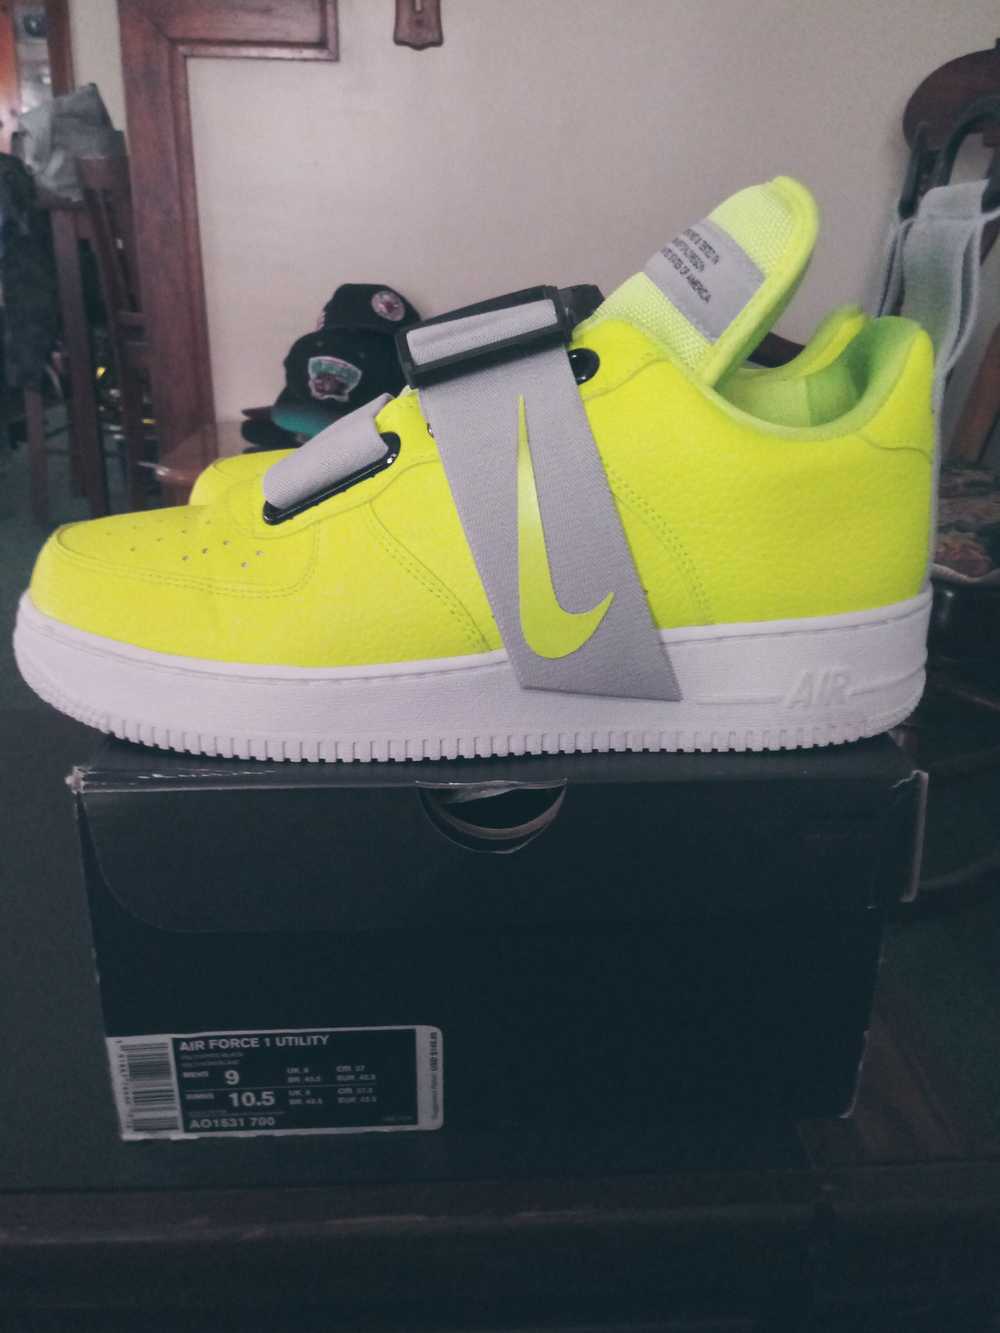 Nike Air Force 1 Utility - image 3